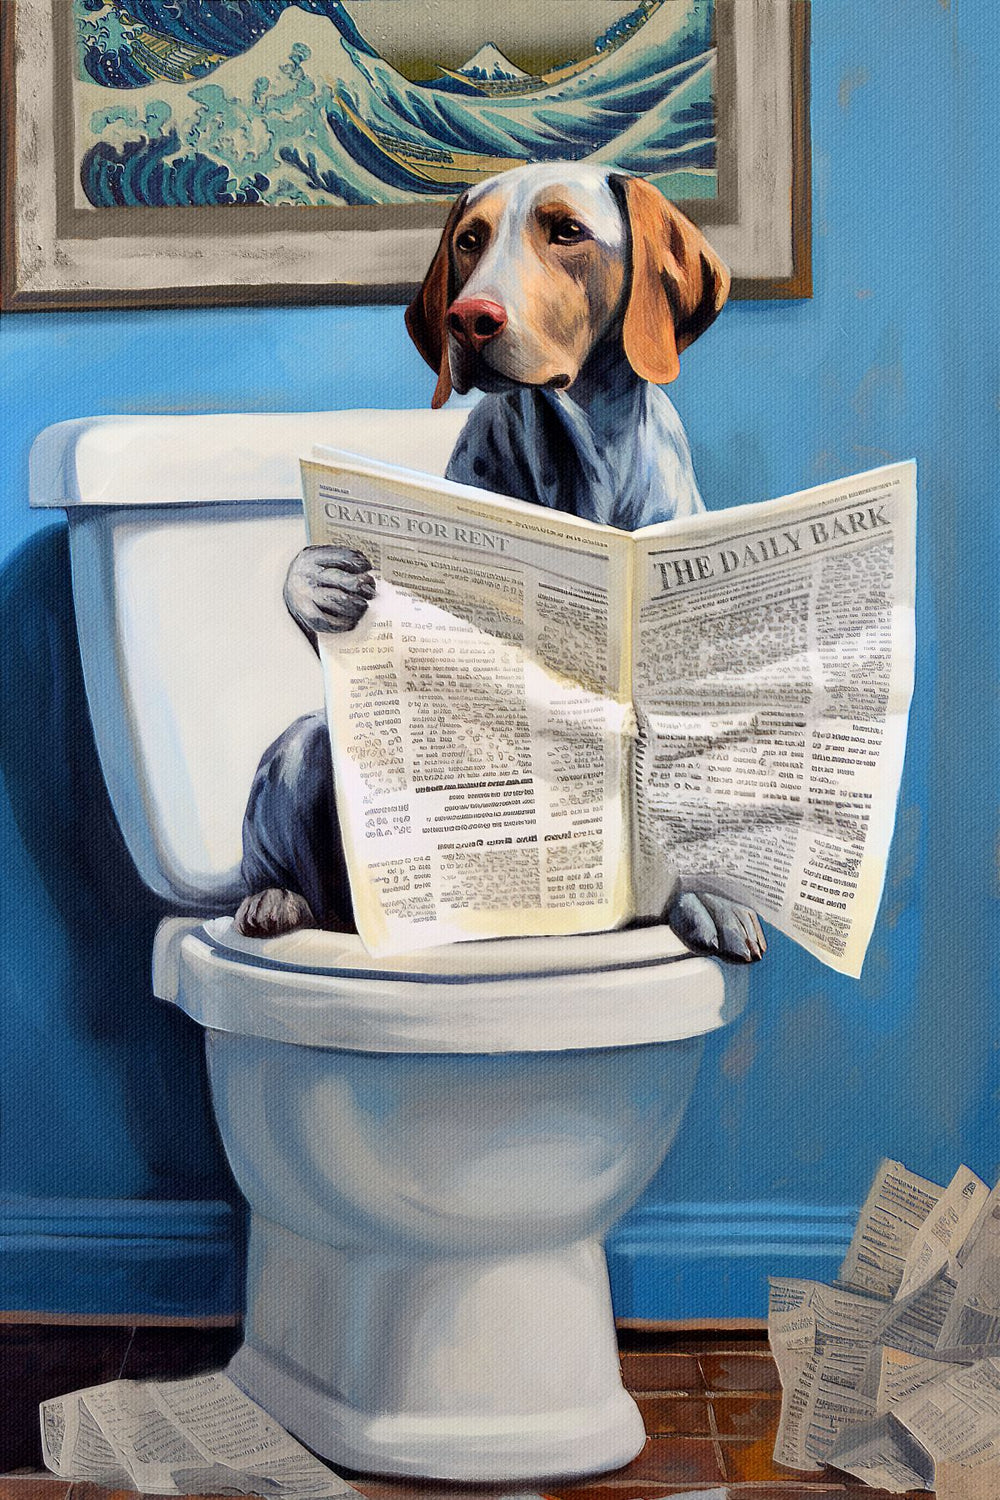 Dog On A Toilet